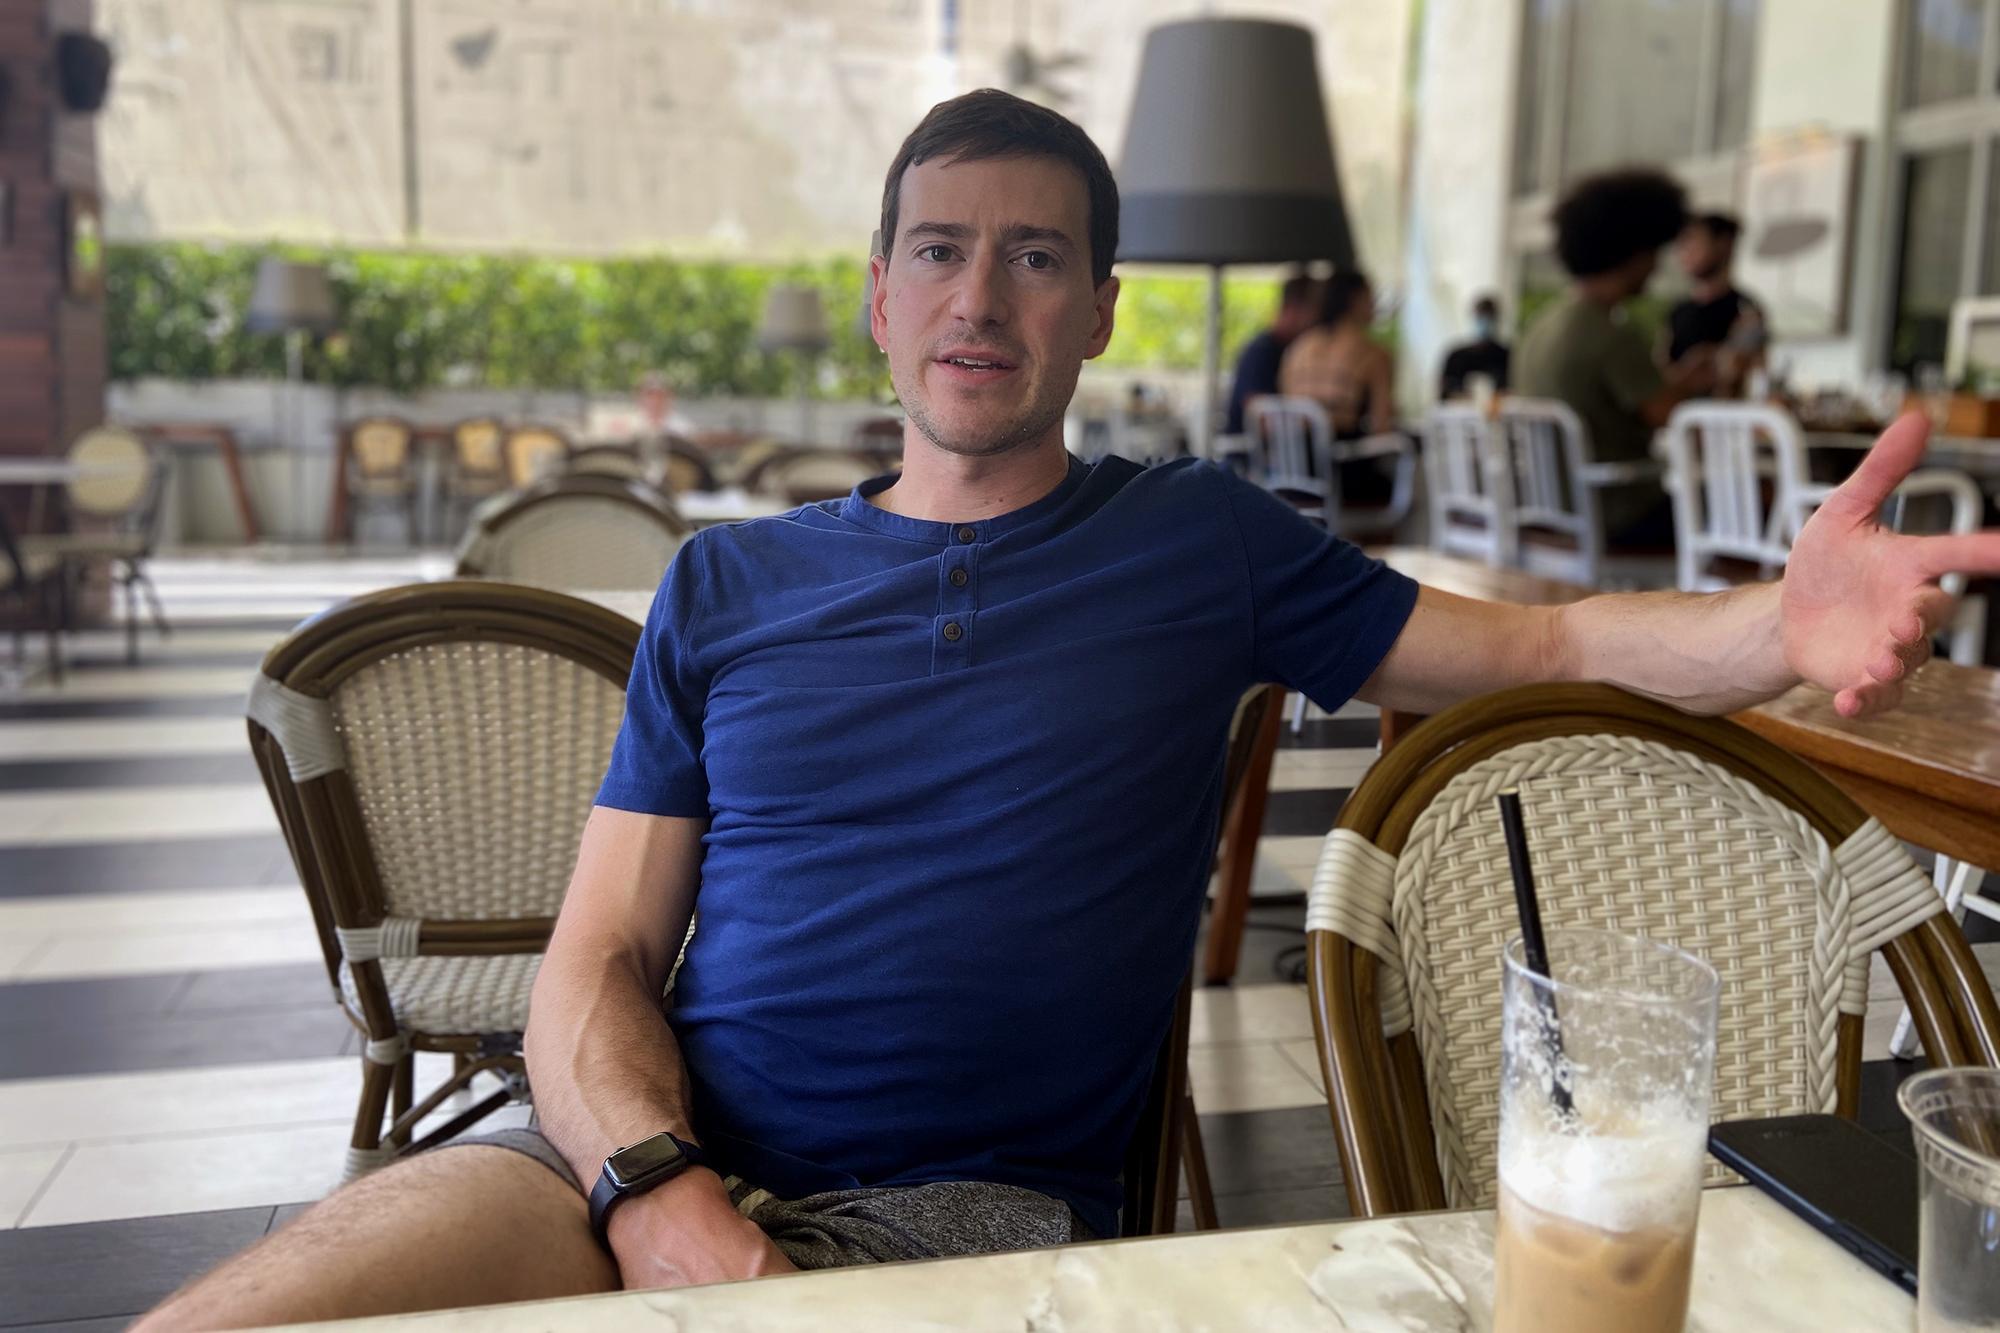 Alex Gladstein, an activist for human rights and bitcoin, in an interview in Miami Beach on October 6, 2021. Photo: Nelson Rauda/El Faro